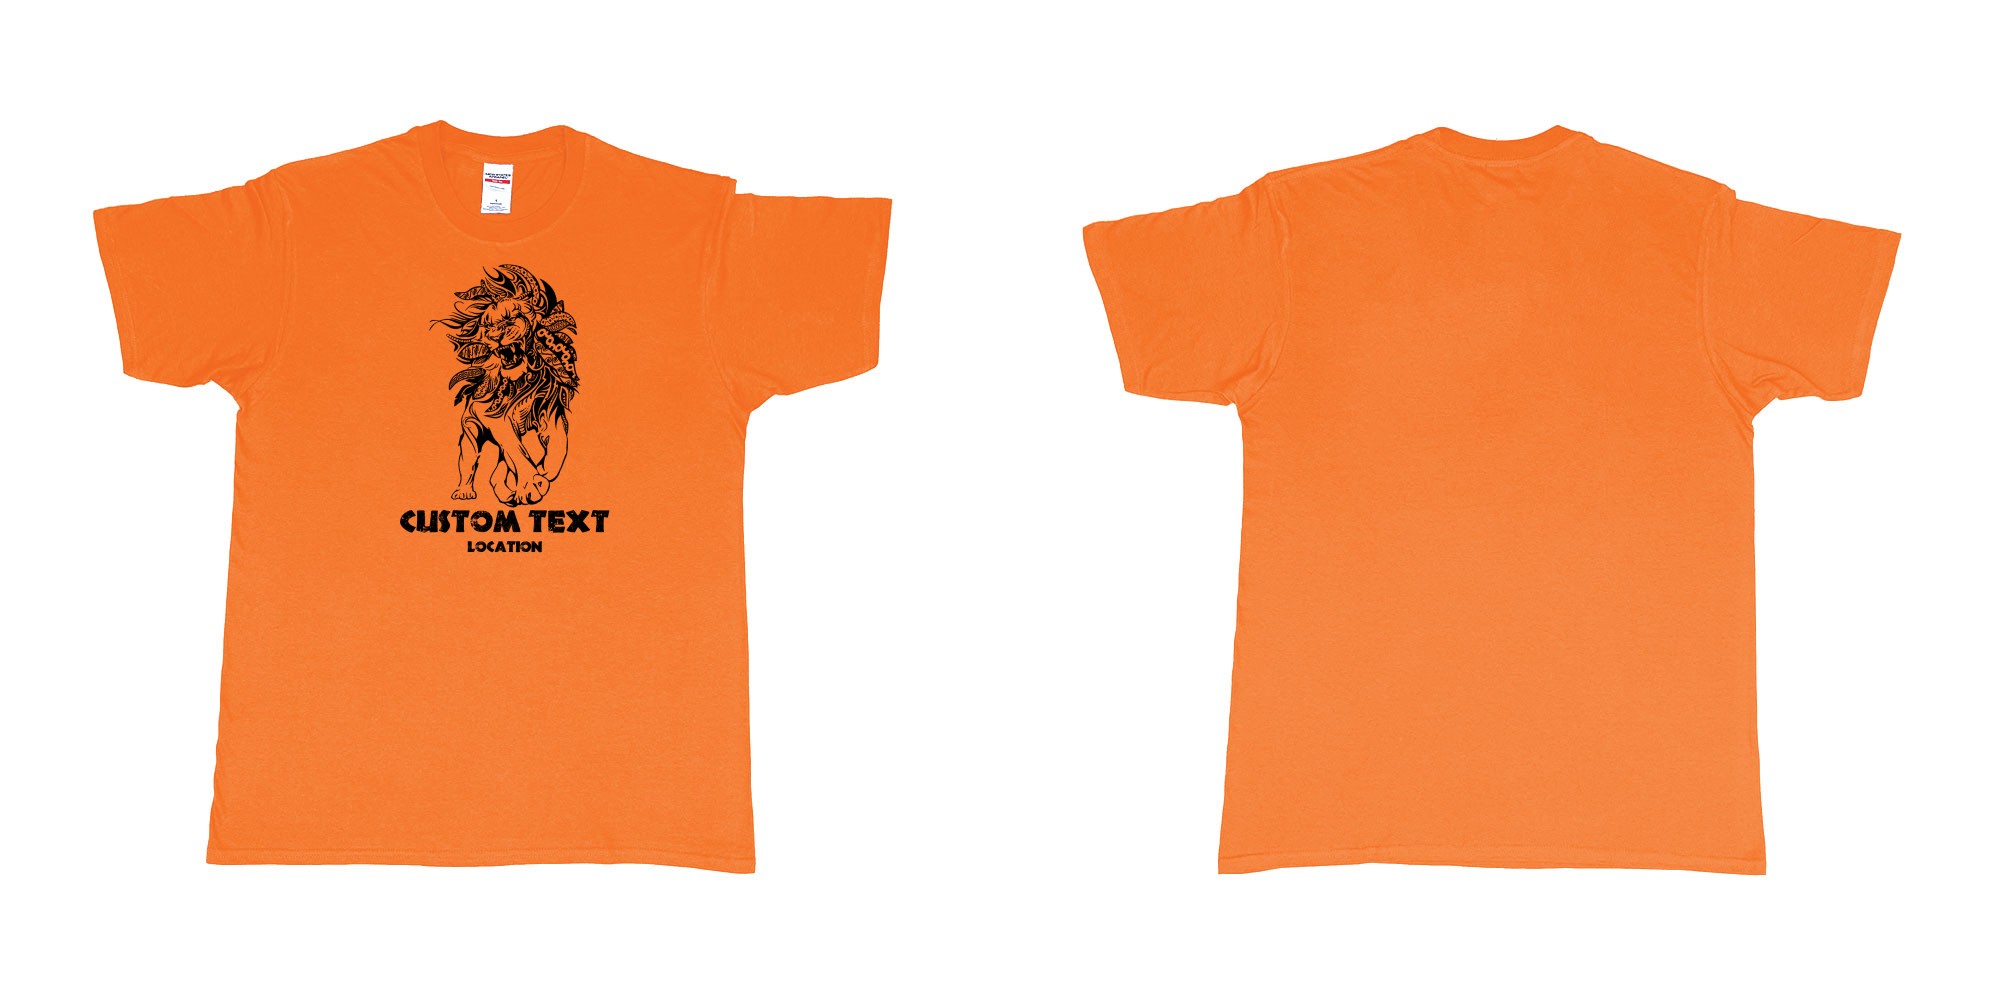 Custom tshirt design lion august tribal in fabric color orange choice your own text made in Bali by The Pirate Way